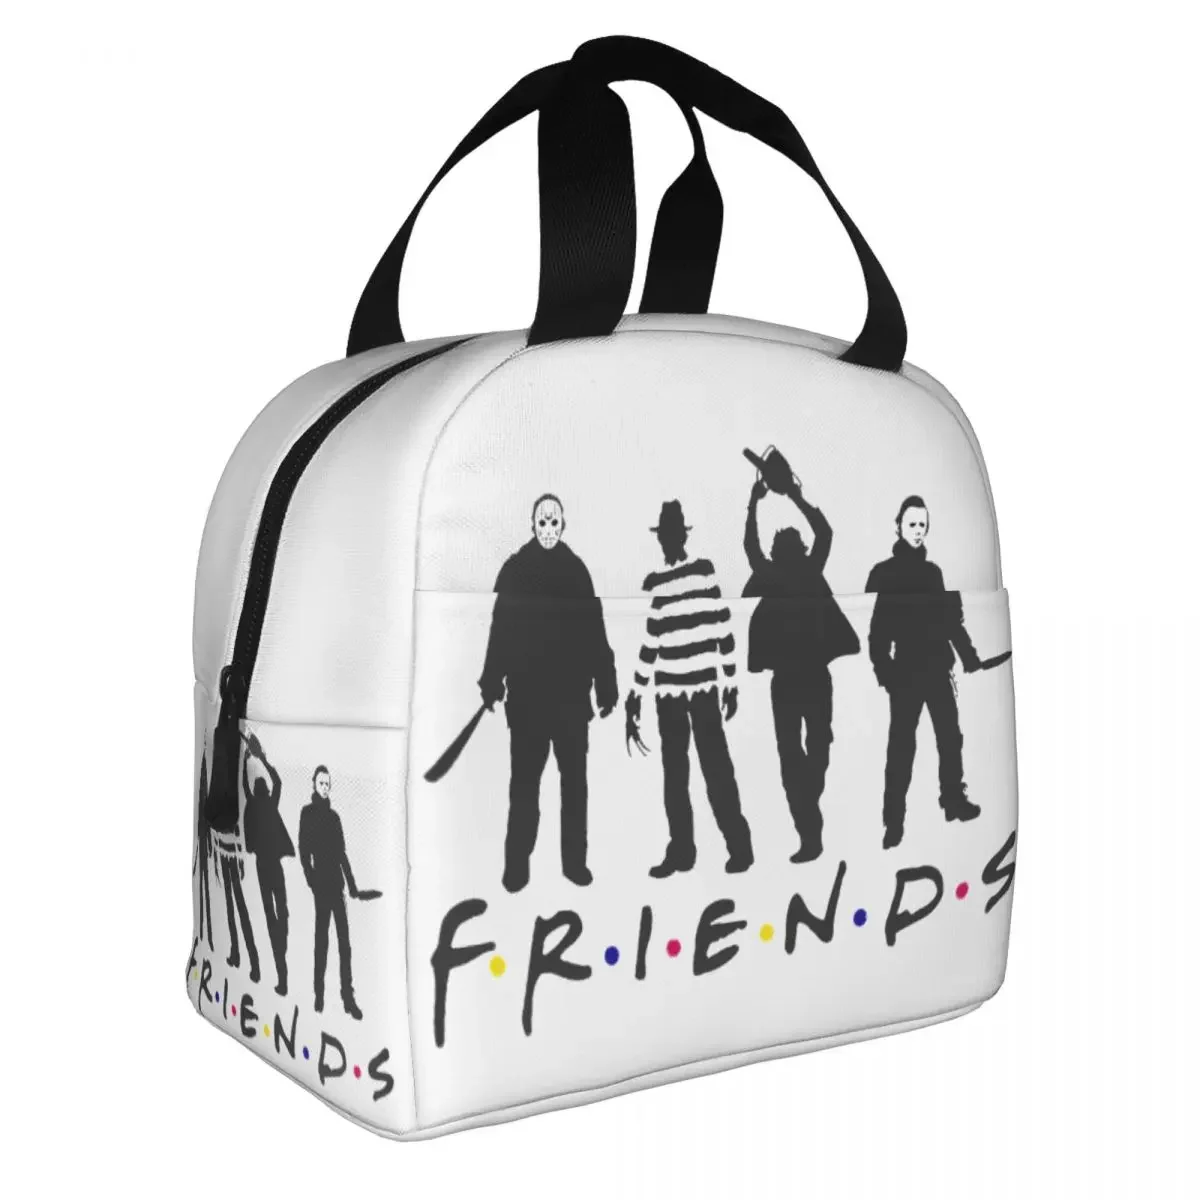 

Horror Friends Pennywise Michael Myers Jason Voorhees Halloween Insulated Lunch Bag Cooler Bag Meal Container Tote Lunch Box